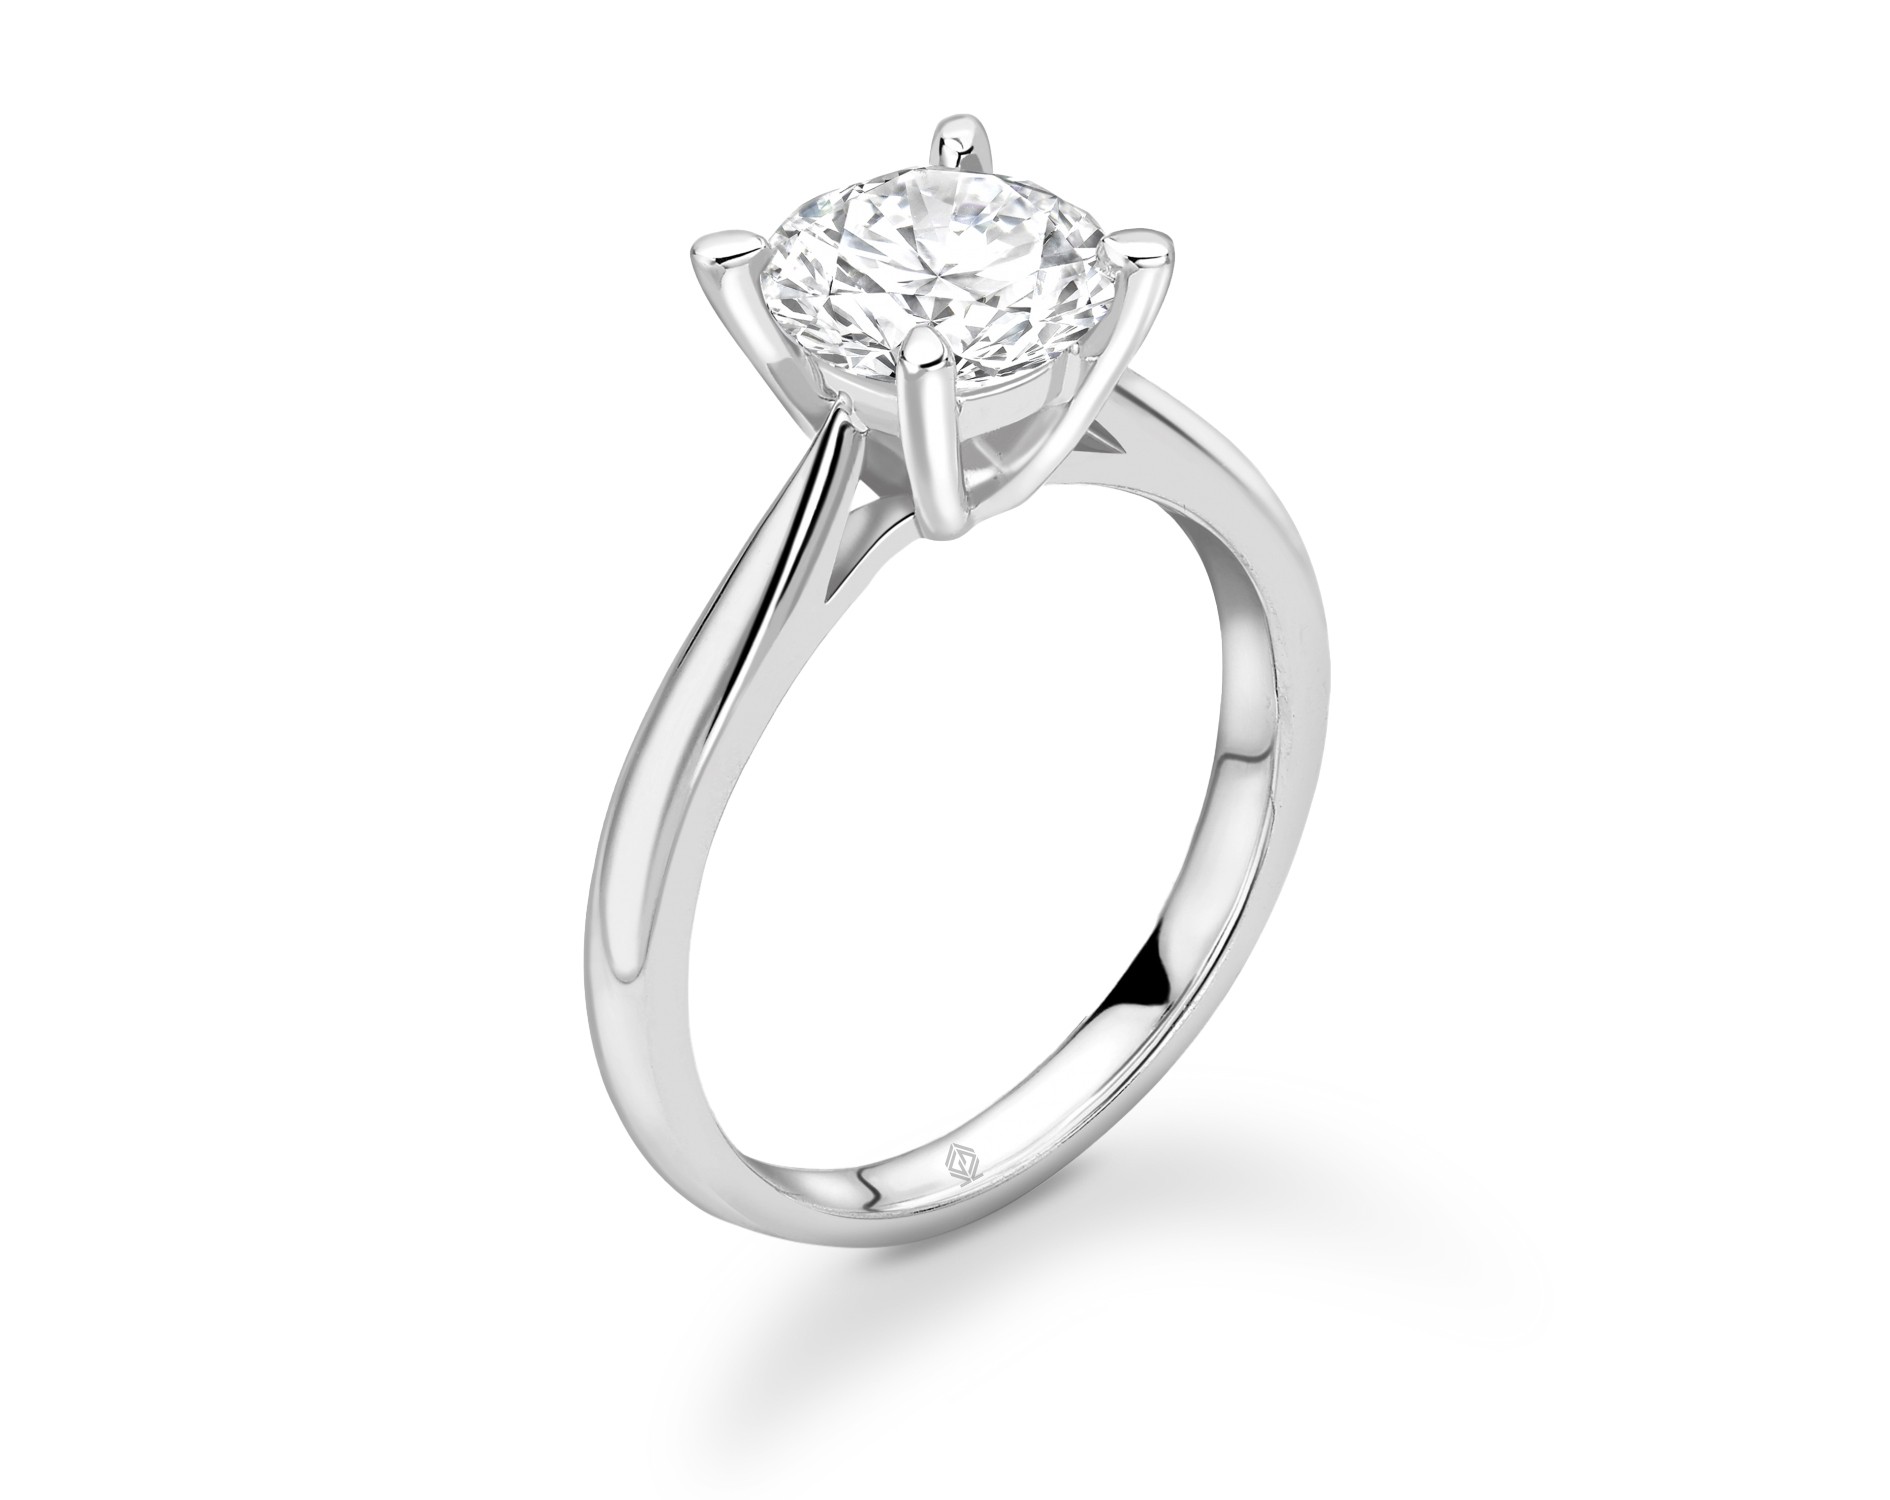 18K WHITE GOLD 4 PRONGS SOLITAIRE ROUND CUT DIAMOND ENGAGEMENT RING